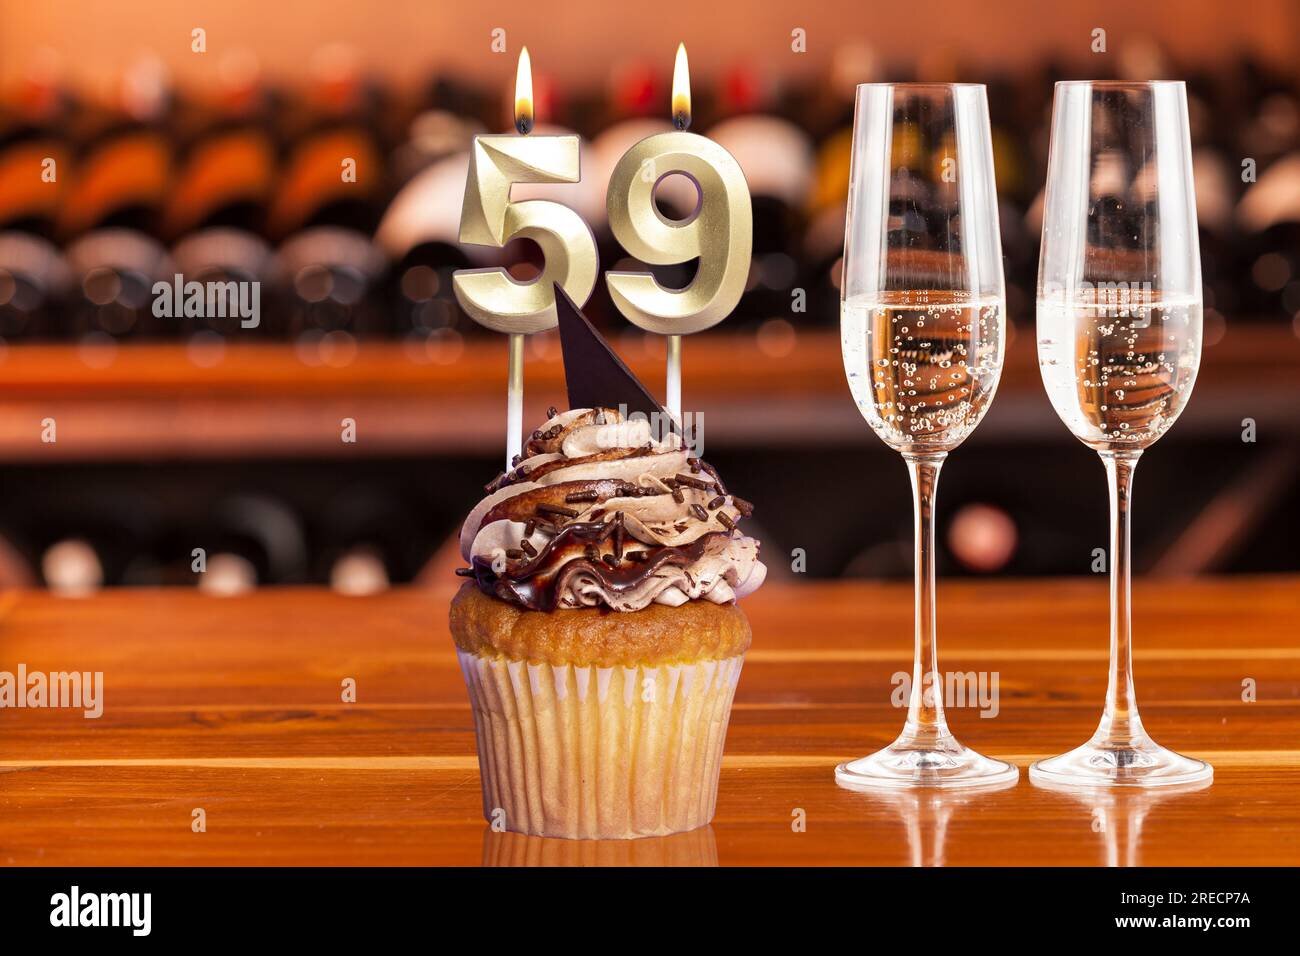 cupcake-with-number-for-celebration-of-birthday-or-anniversary-number-59-2RECP7A.jpg